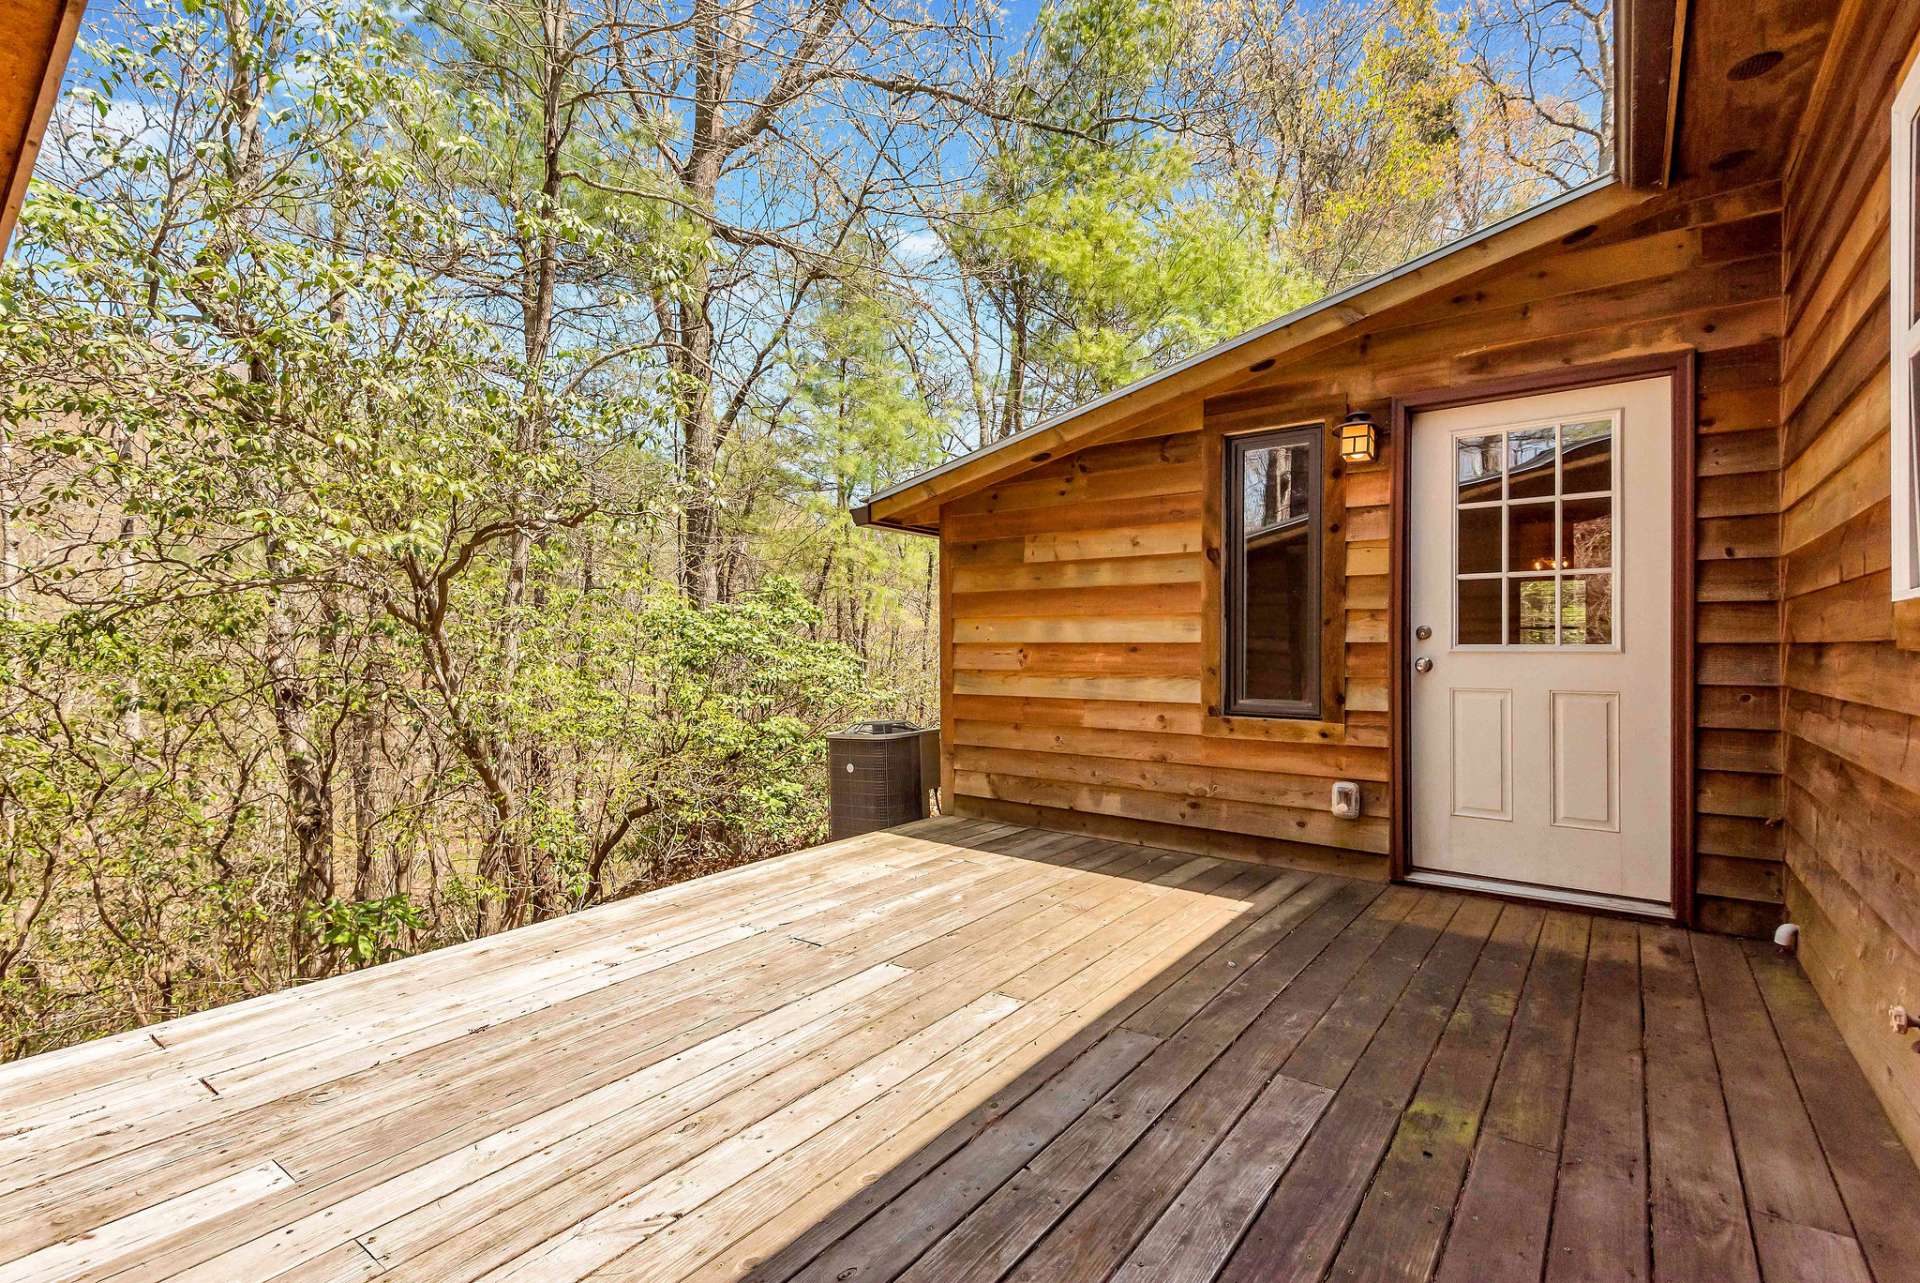 The back deck offers privacy for a grill or a hot tub area.